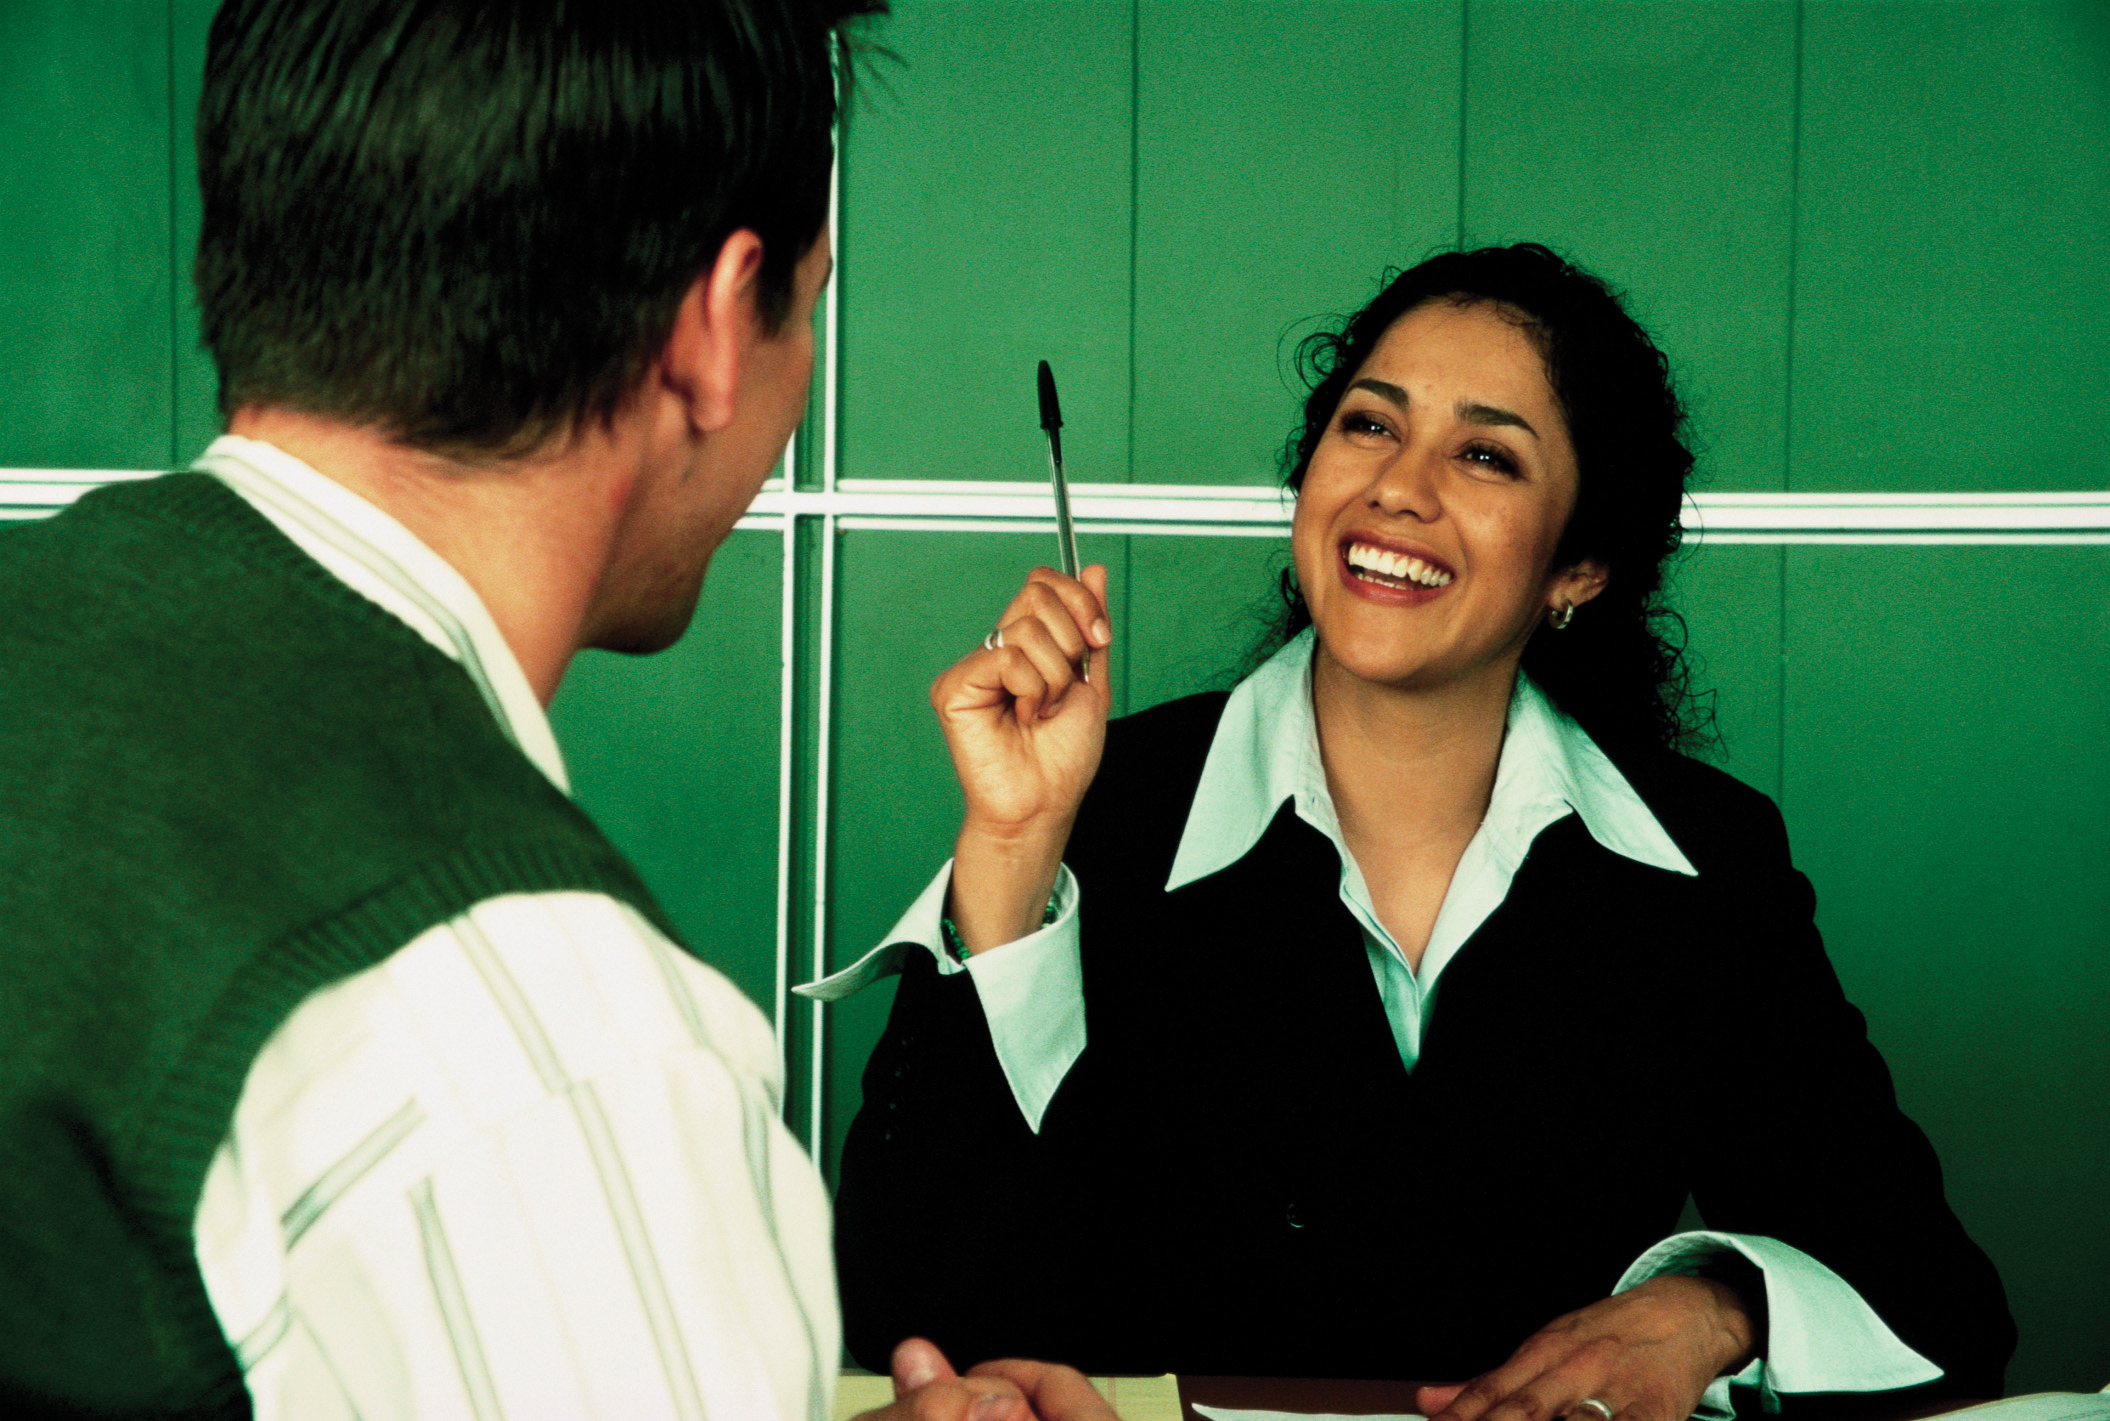 A smiling woman gesturing with a pen, as she talks to a man across a desk.